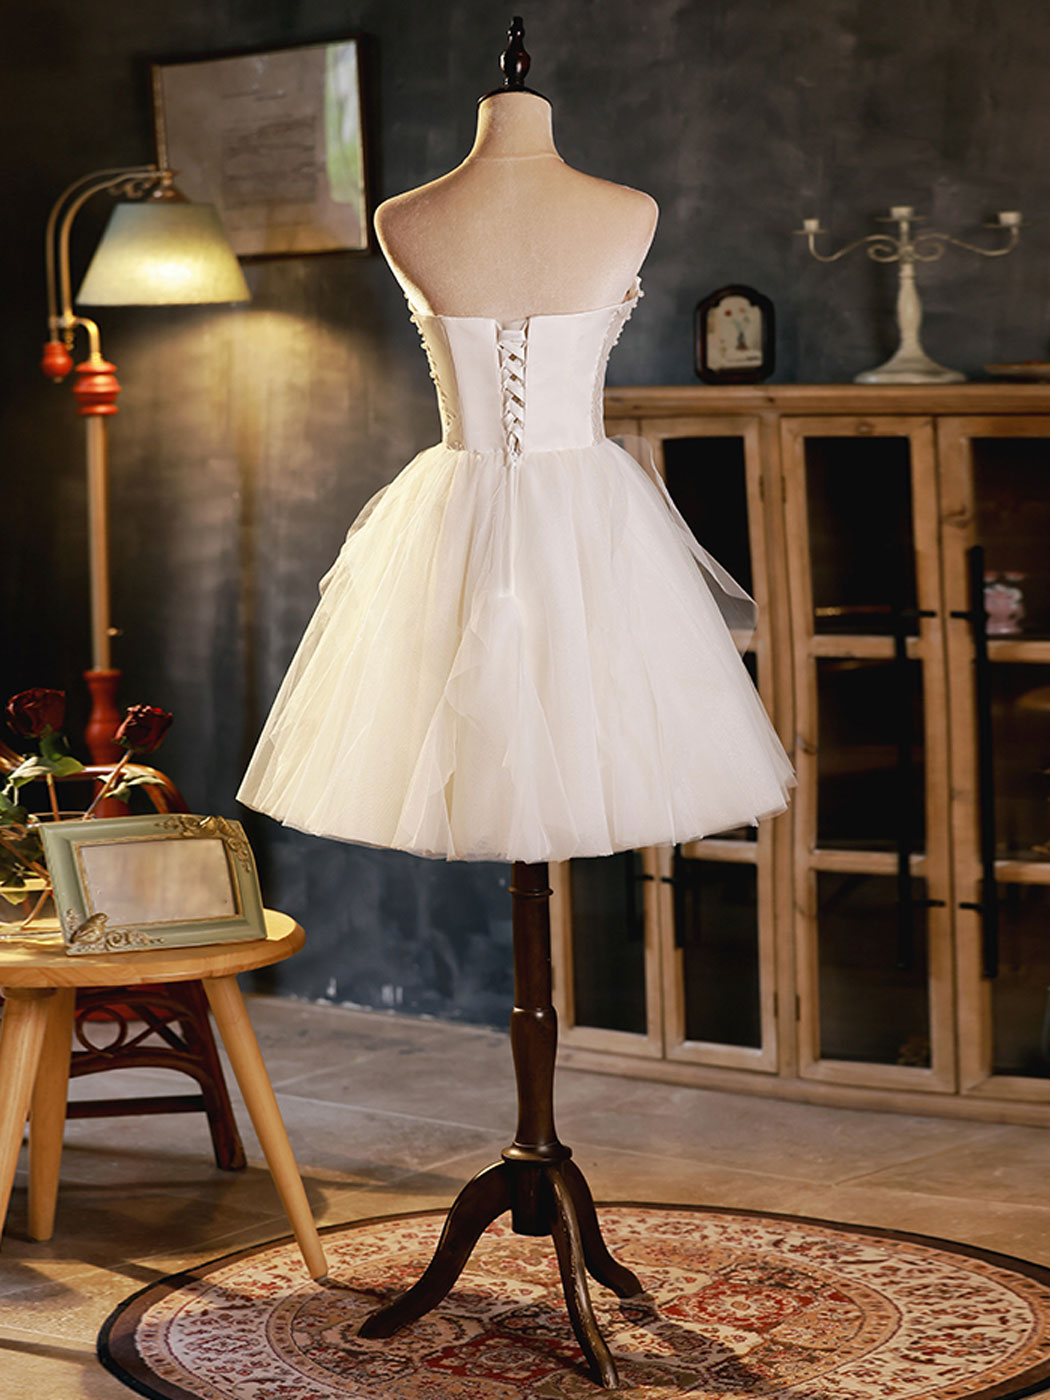 Club Outfit, White Sweetheart Neck Tulle Short Prom Dress, Light Champagne Homecoming Dress